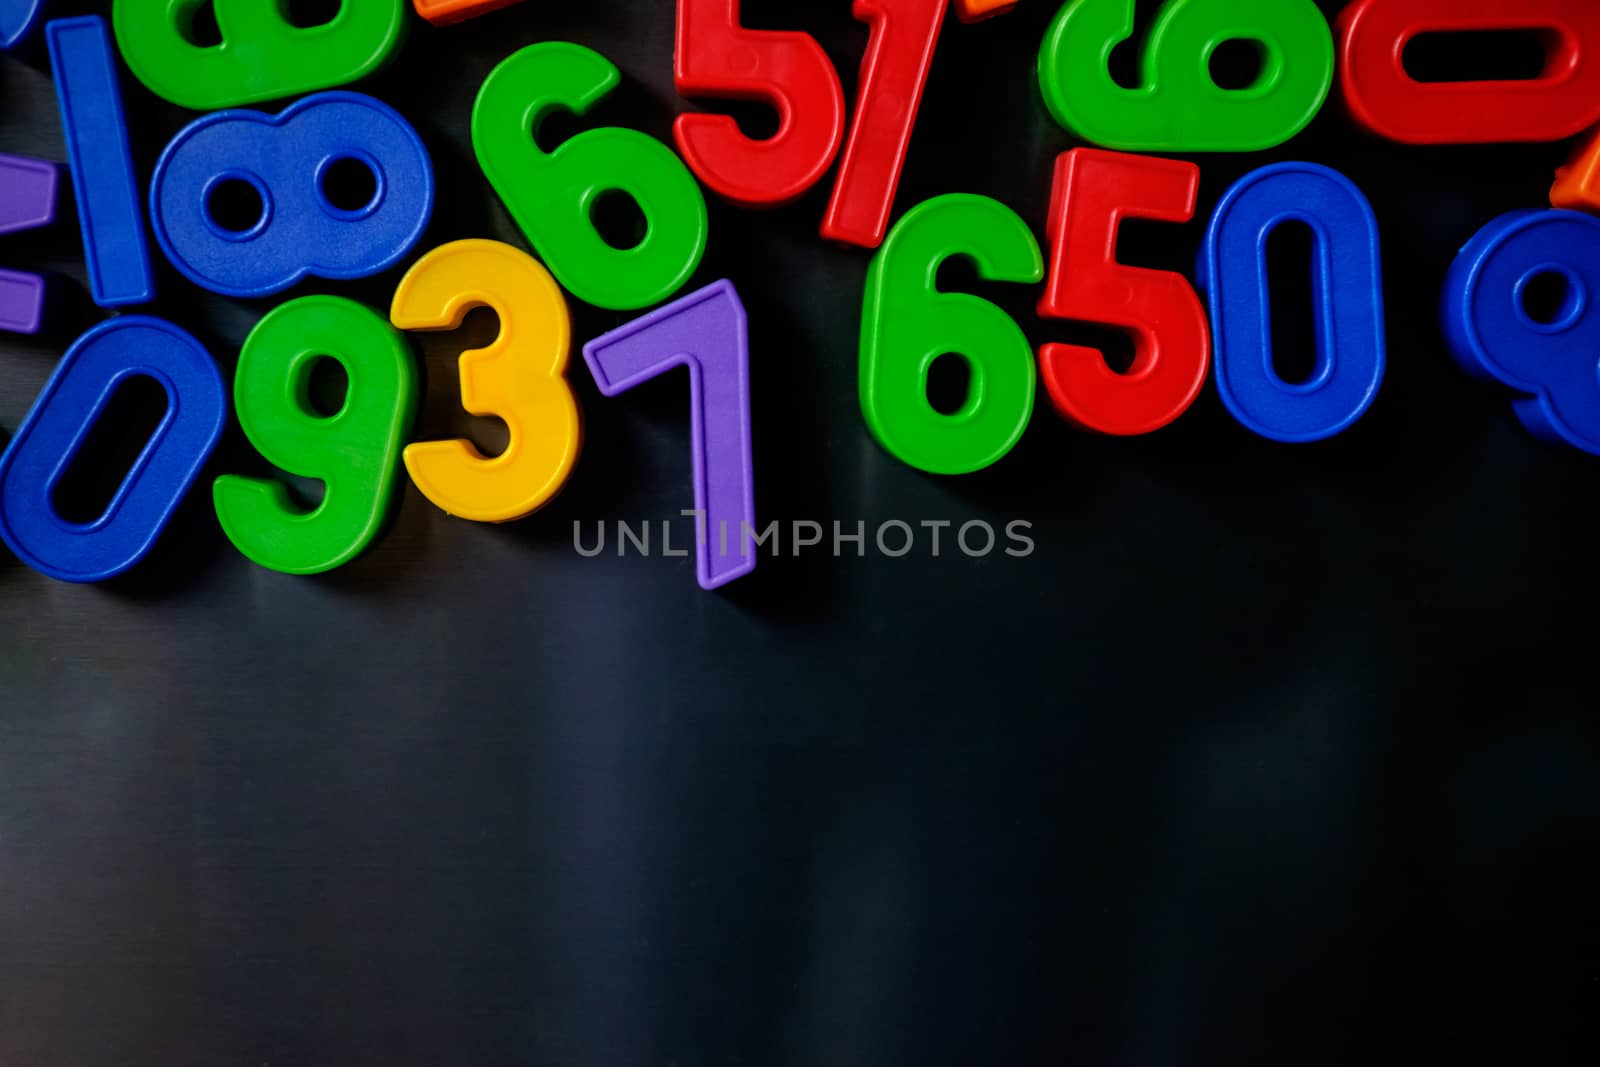 Colorful magnetic numbers and letters on the fridge by mikelju